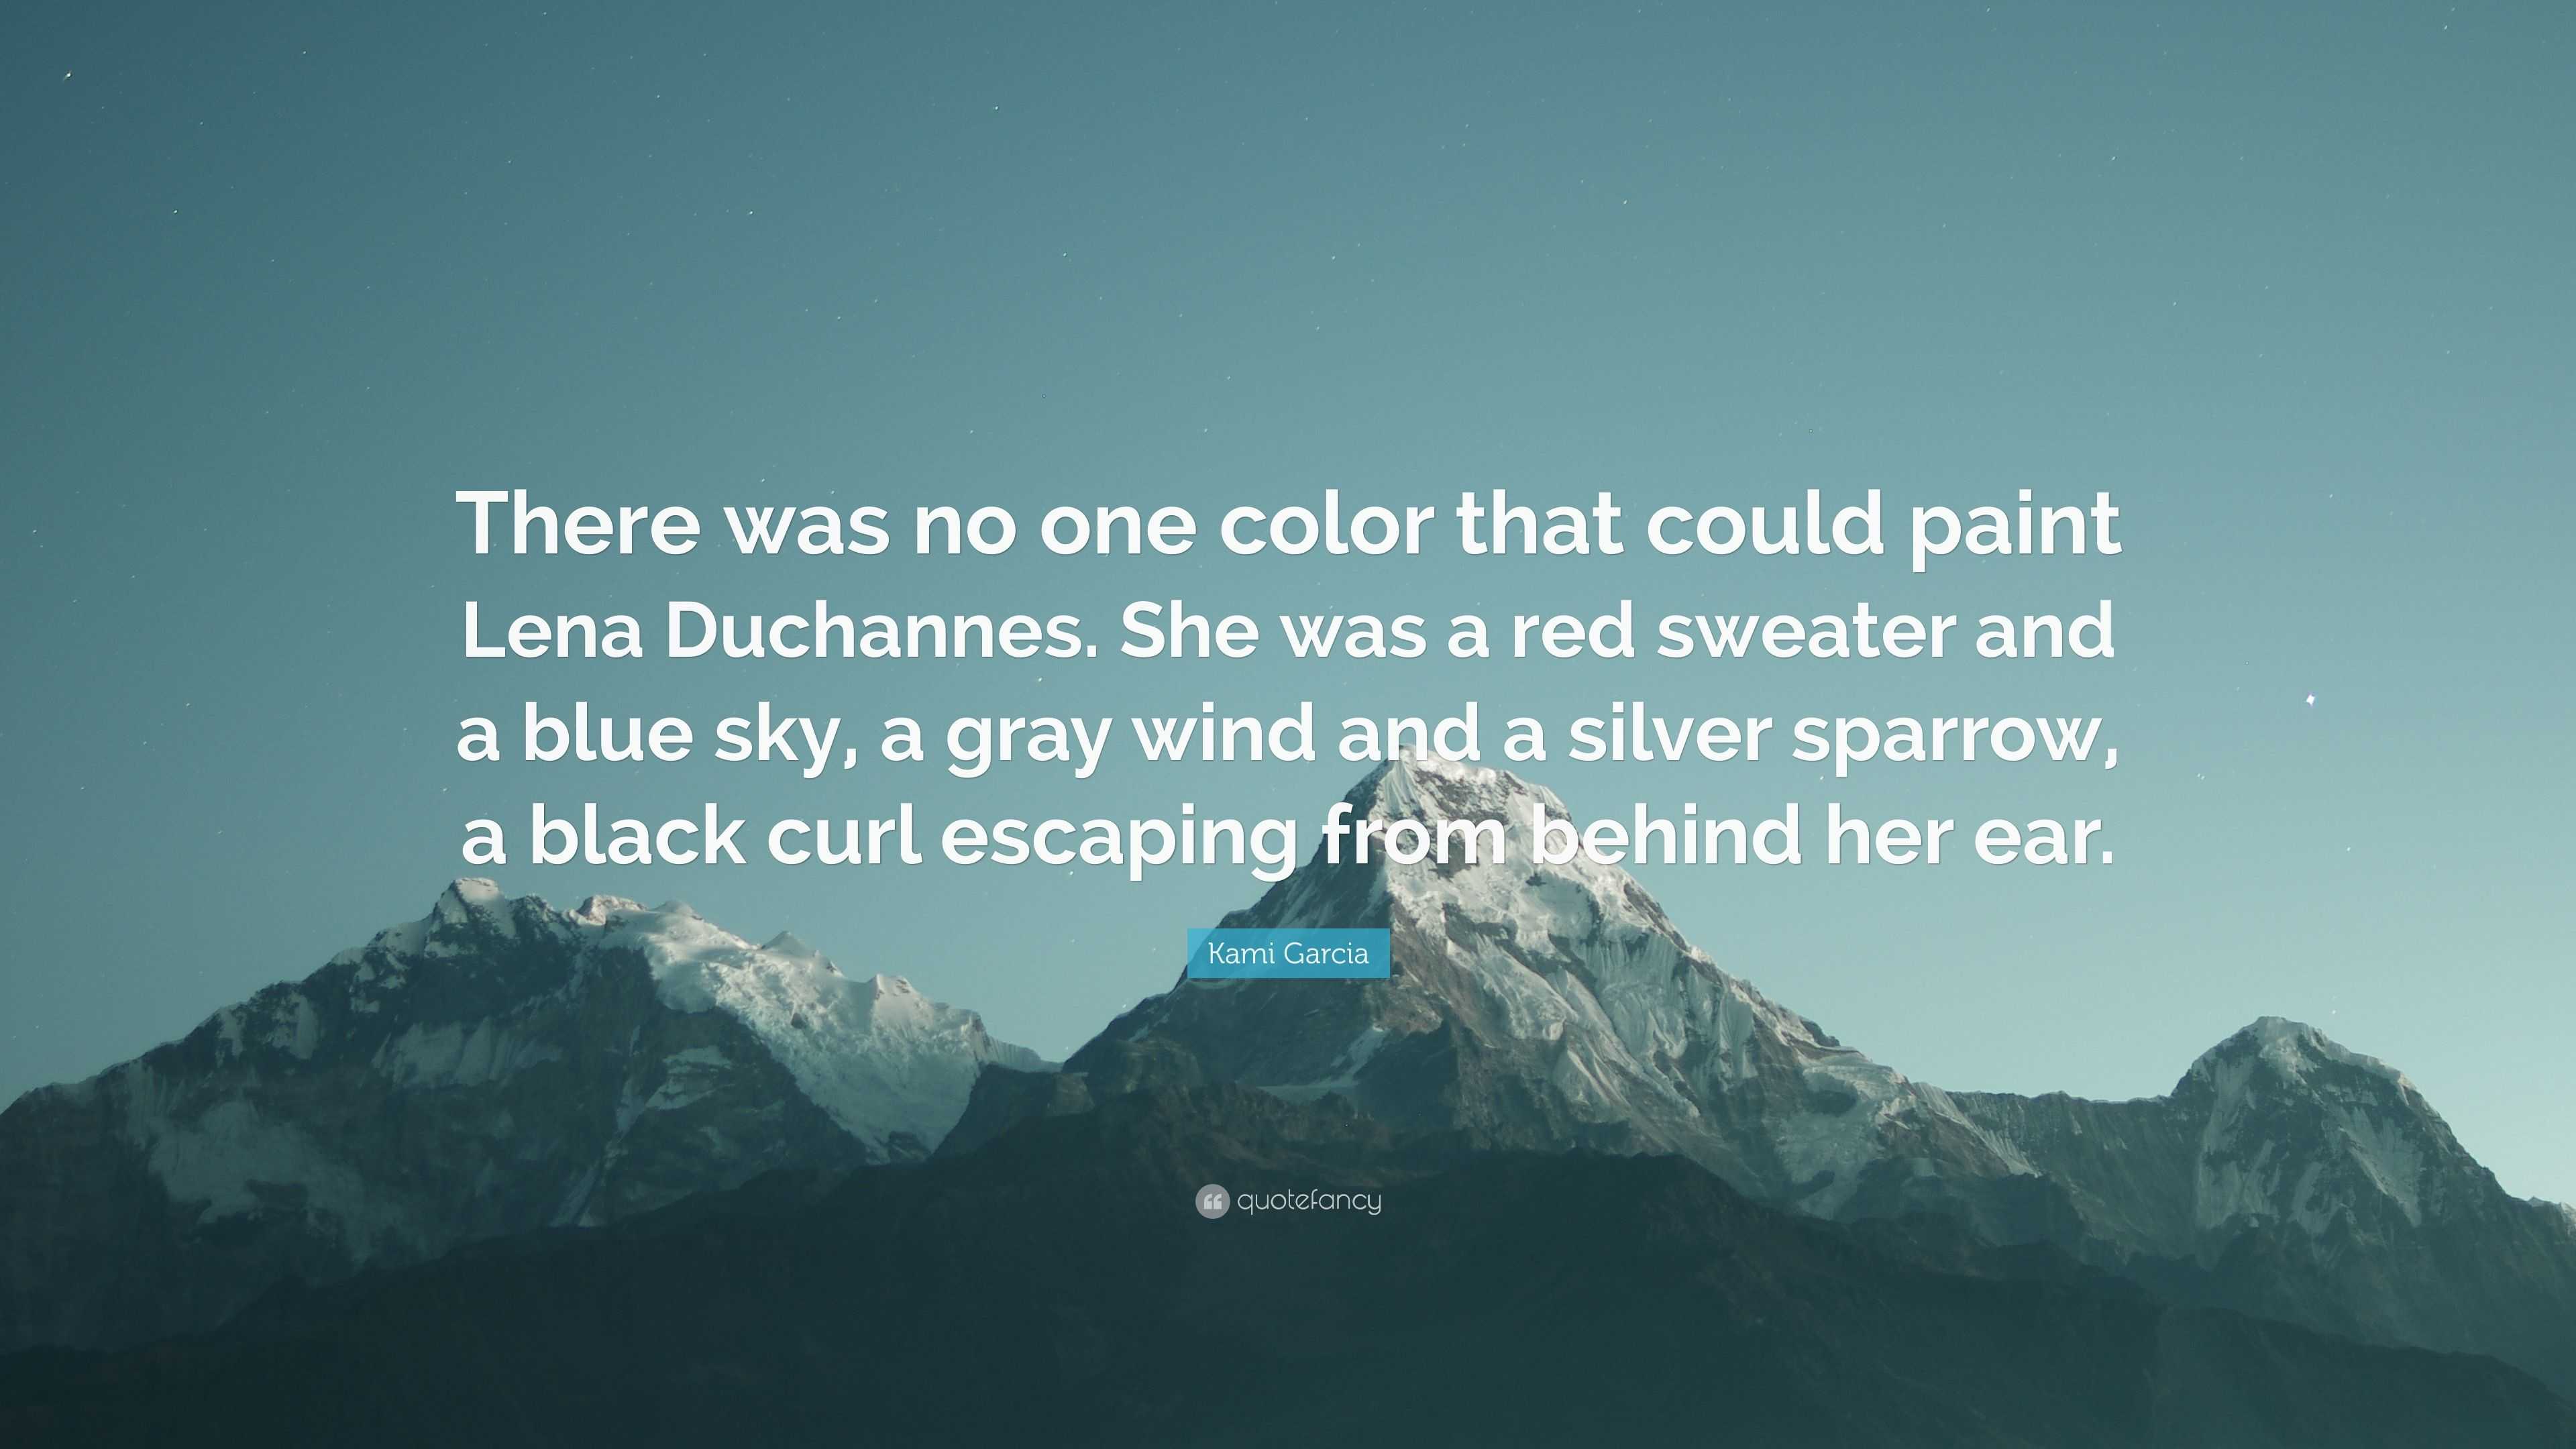 You've probably never seen this color before #womeninstem #voiceact, true cyan